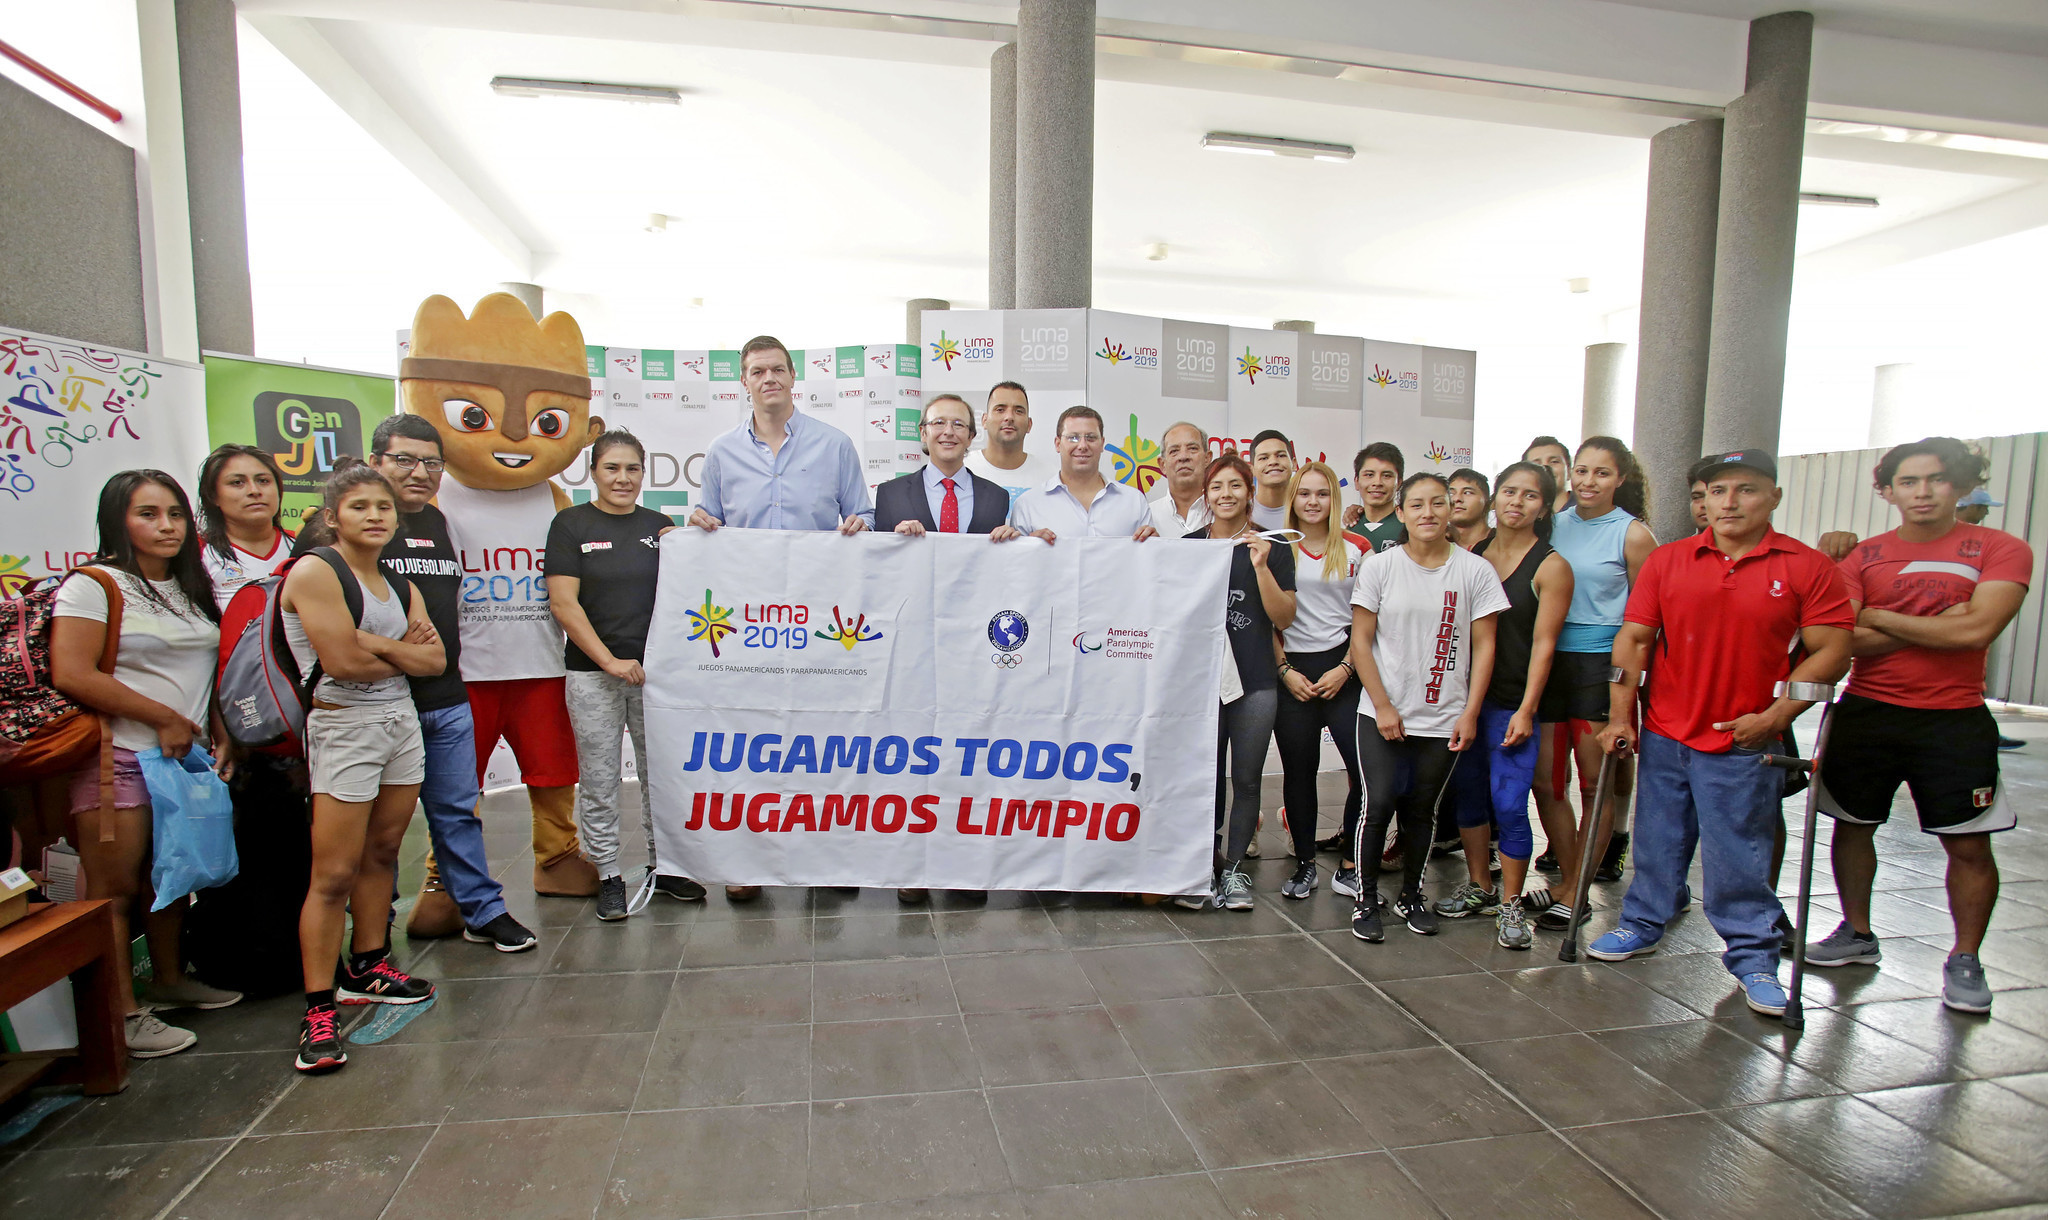 Lima 2019 launches anti-doping courses for athletes and doctors